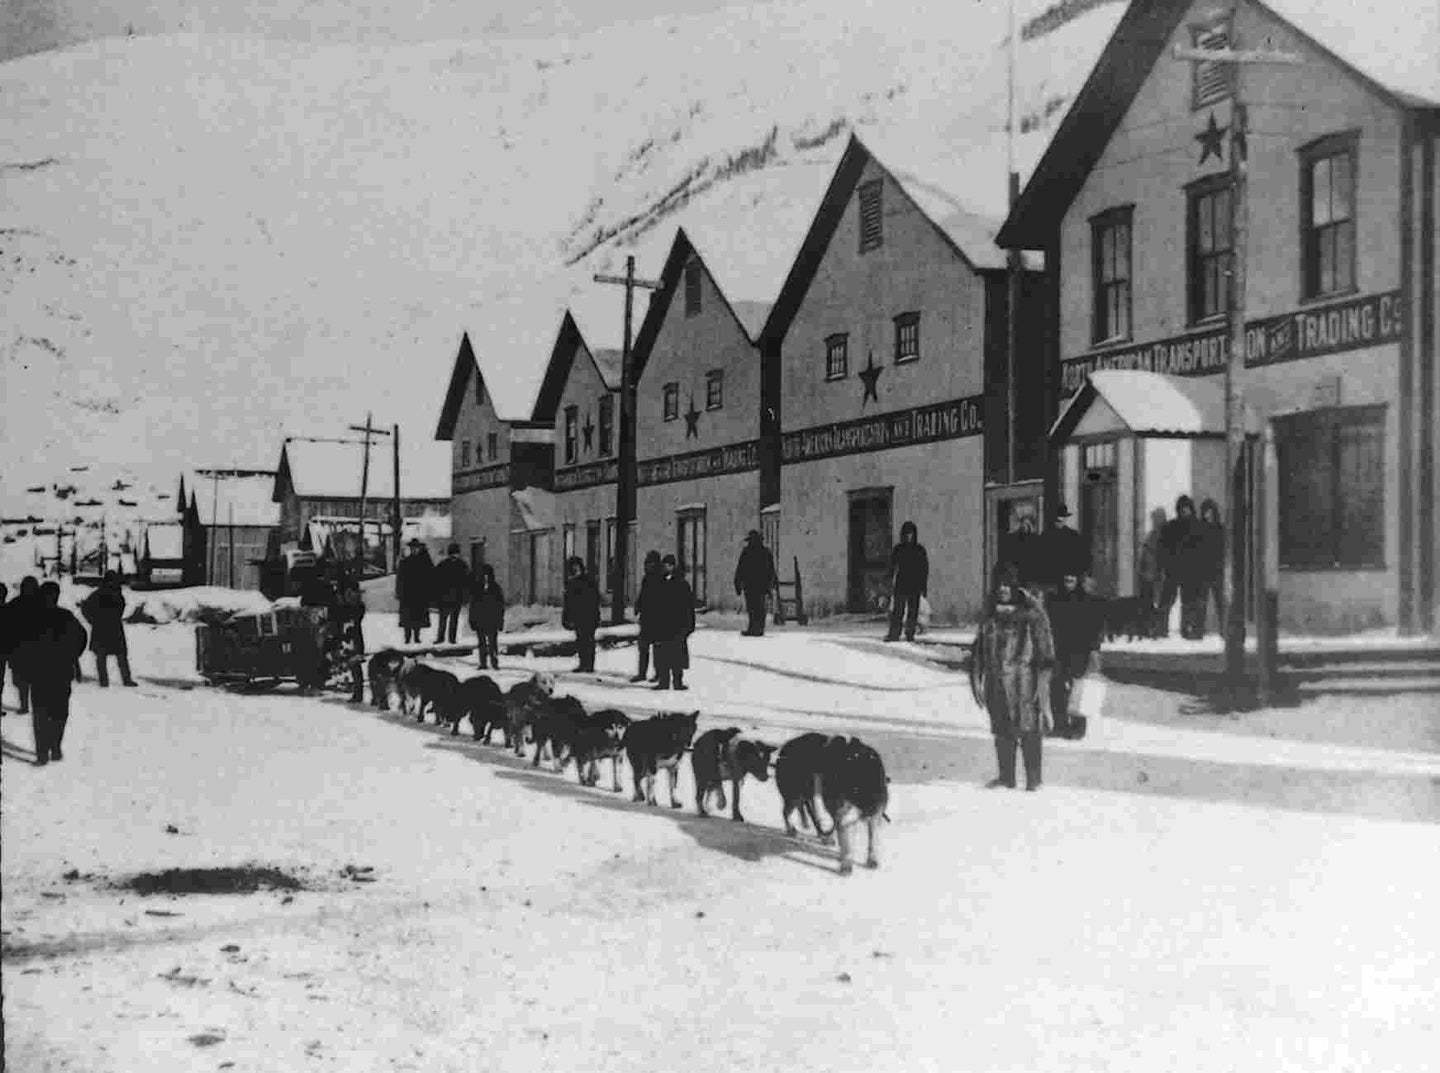 Front Street, Dawson. Team of Malamute Dogs Starting to the Mines, c1898